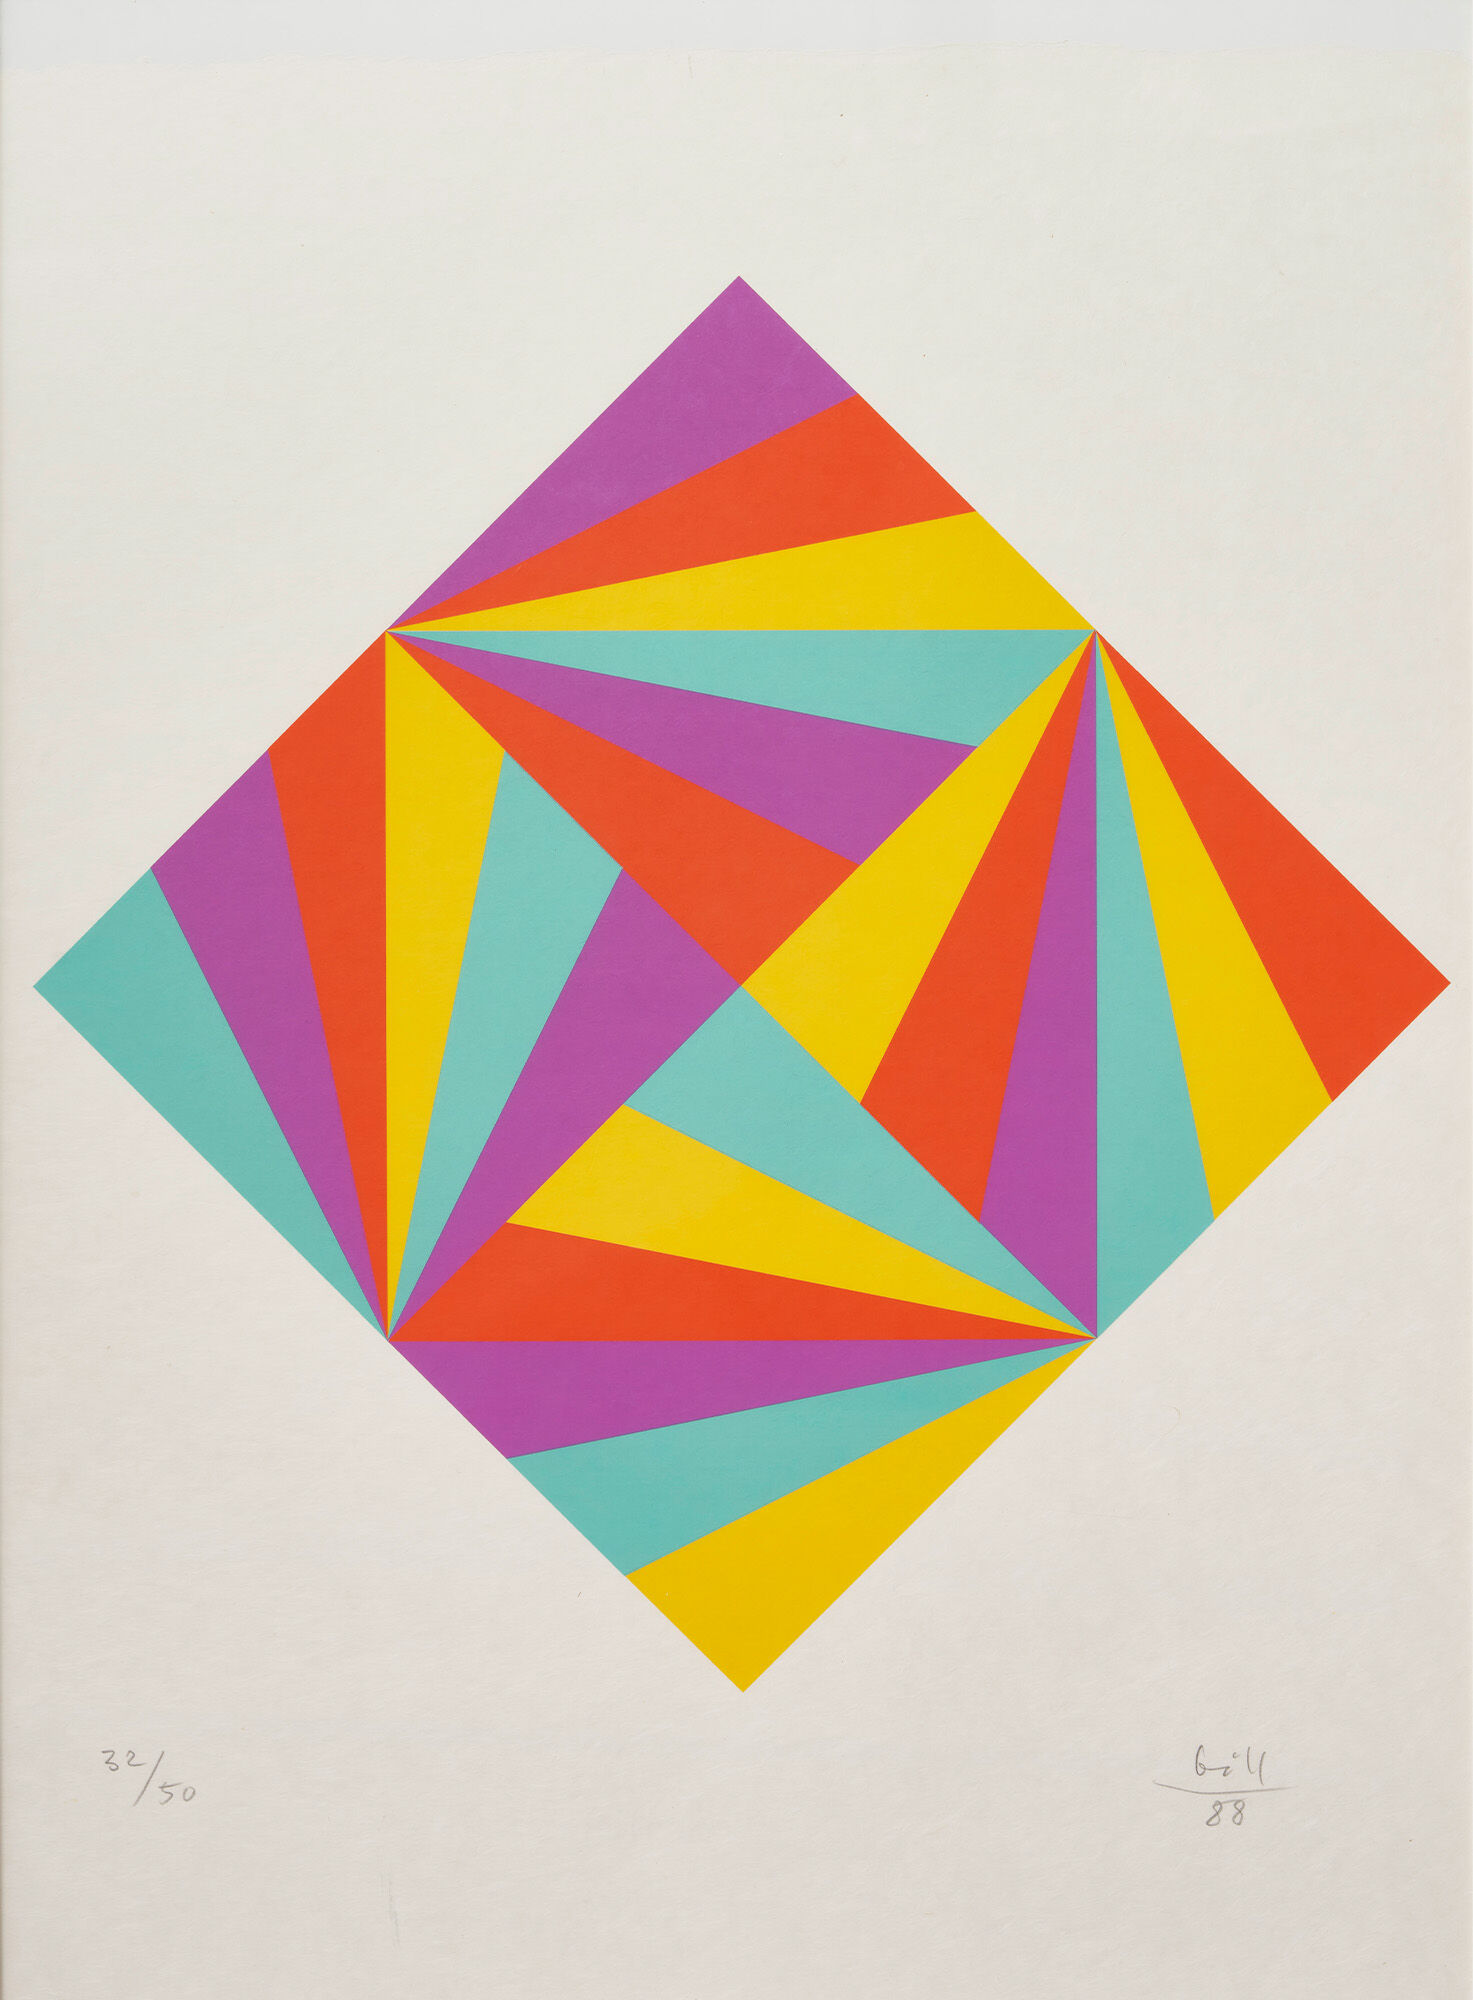 Picture "Rotation in Squares of Four" (1988) by Max Bill